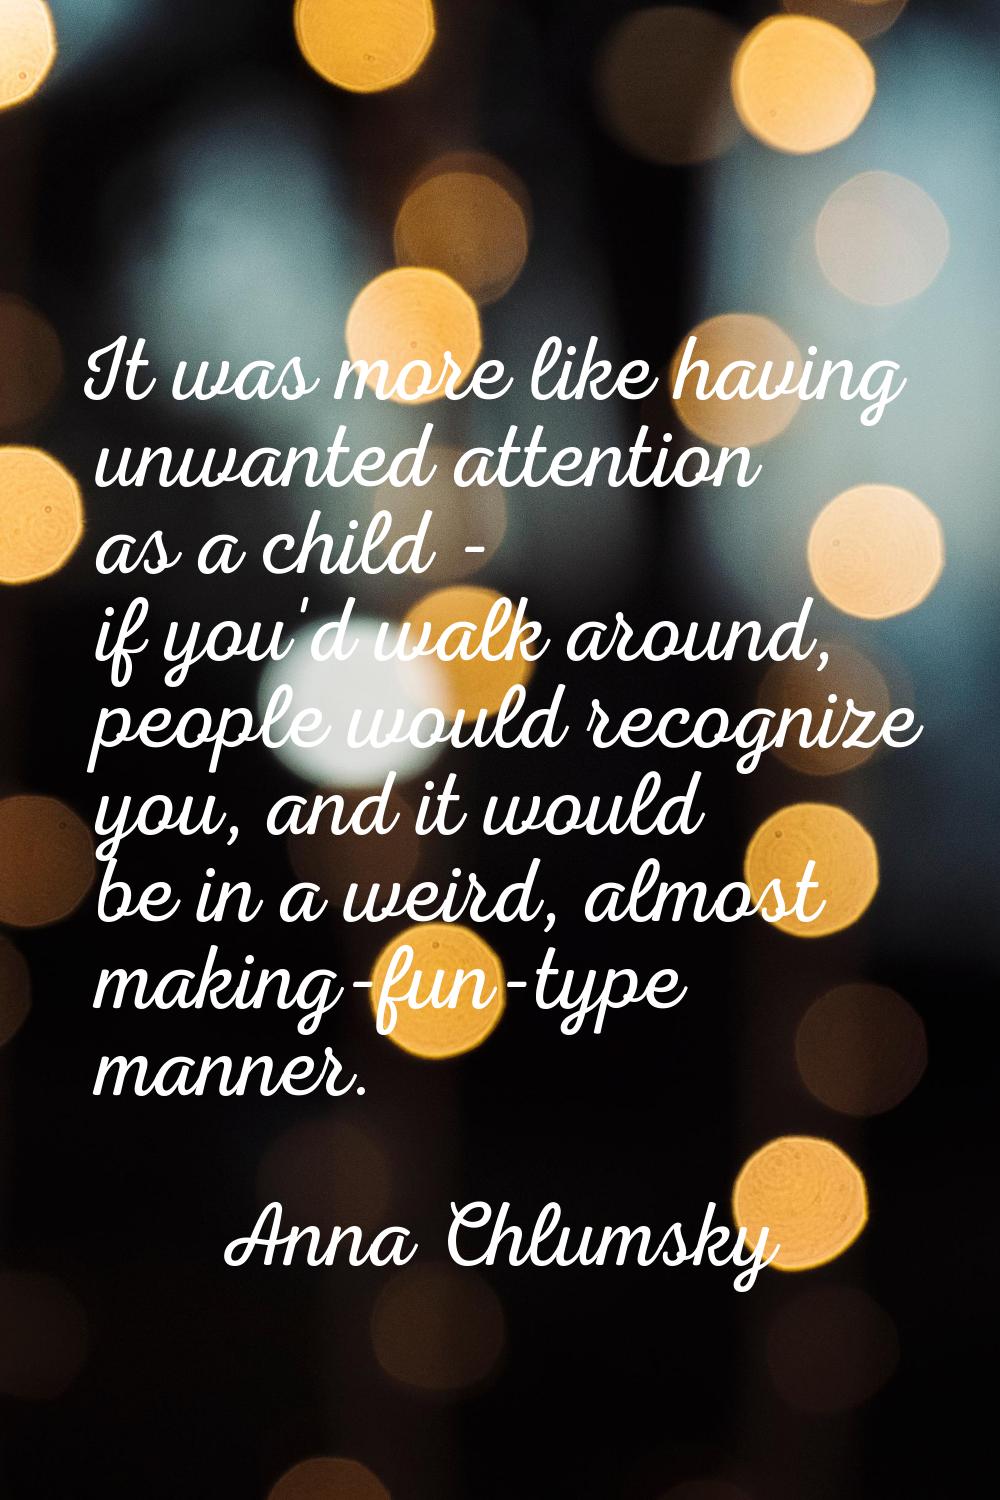 It was more like having unwanted attention as a child - if you'd walk around, people would recogniz